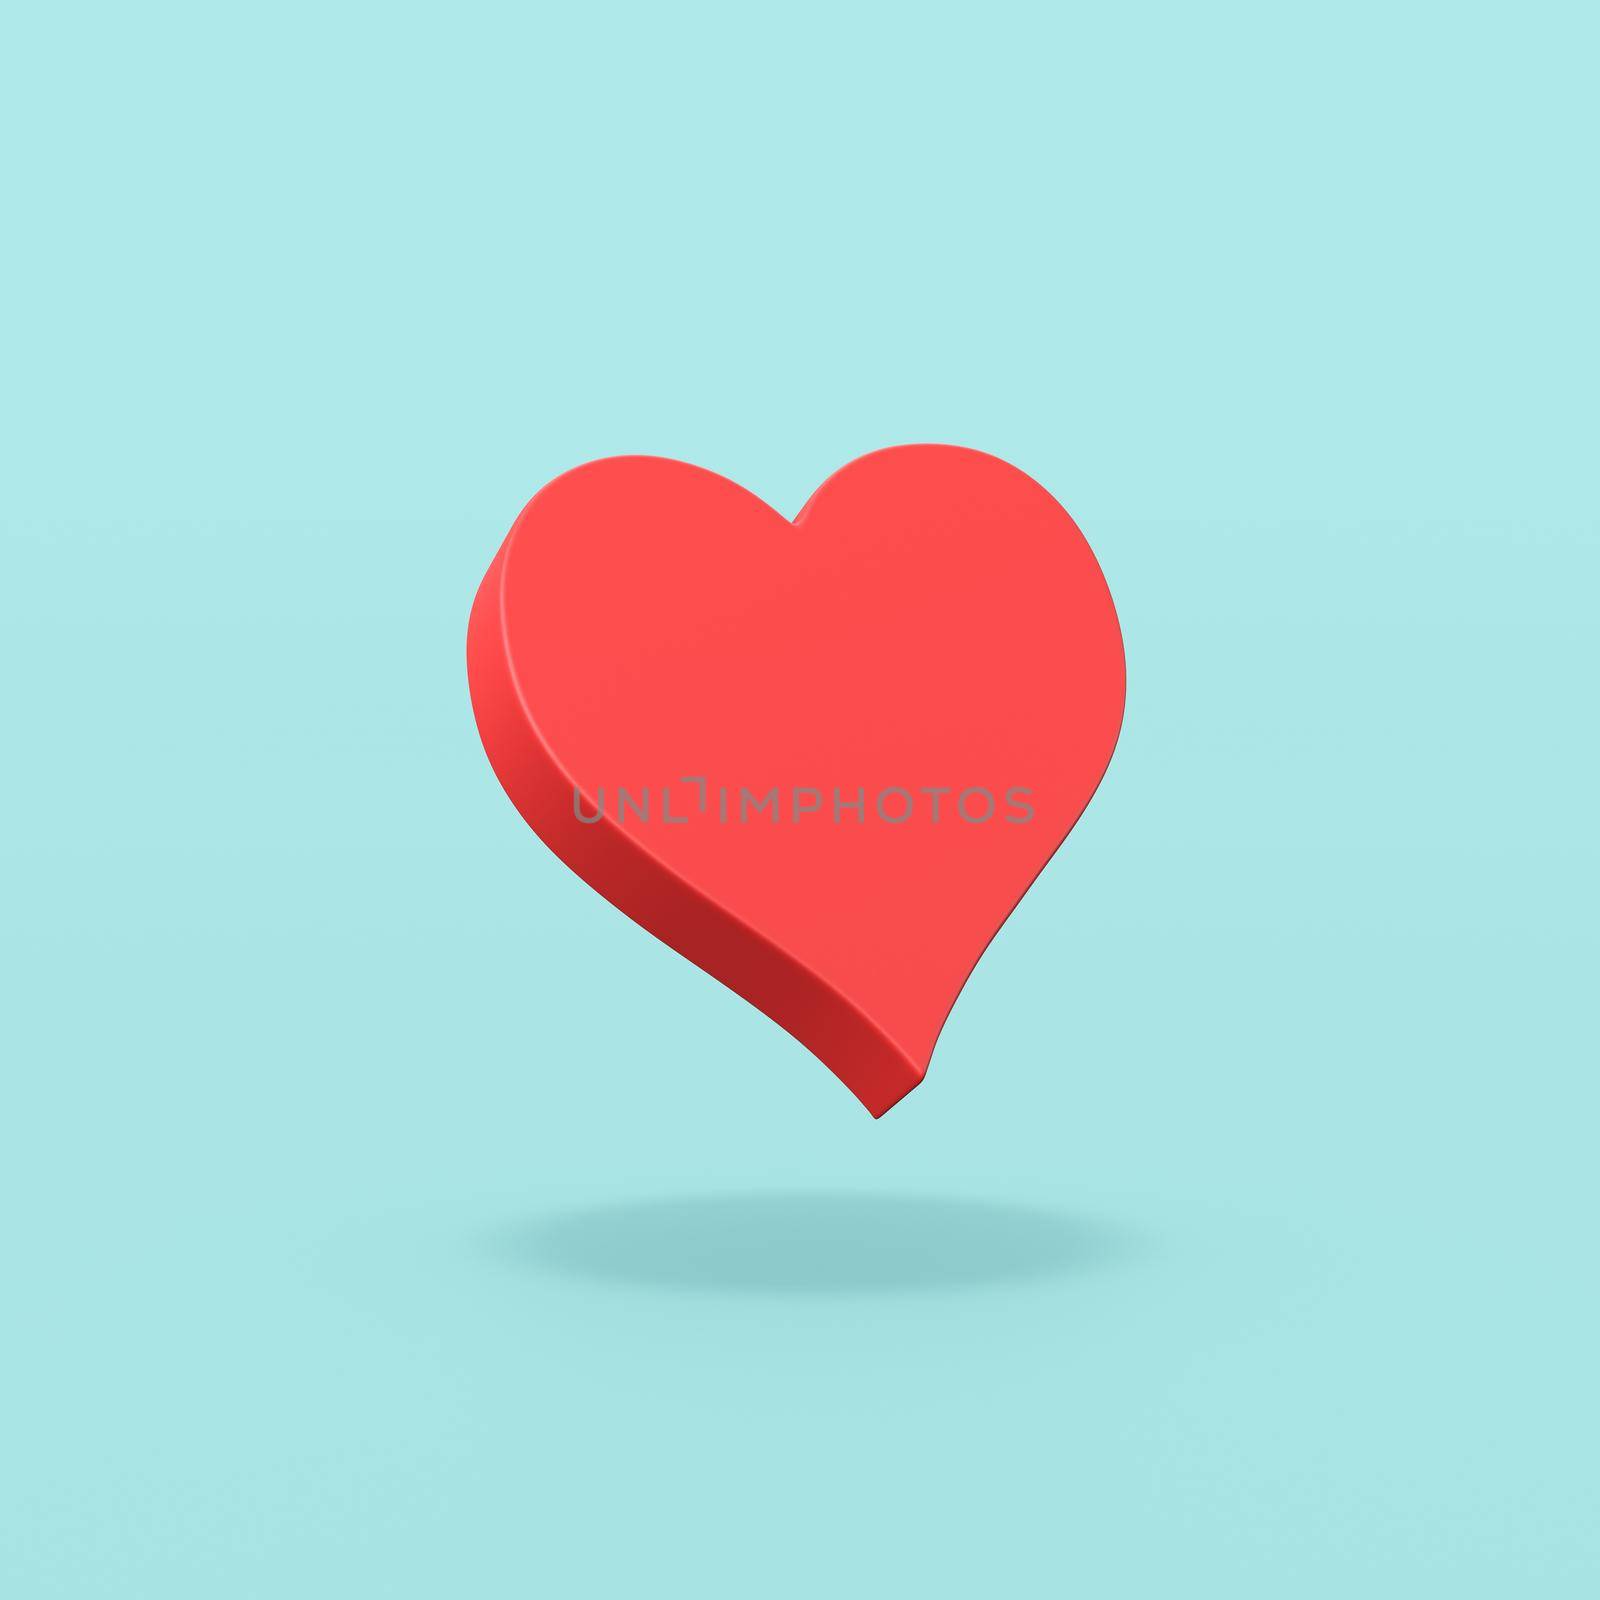 Red Heart Symbol Shape on Flat Blue Background with Shadow 3D Illustration